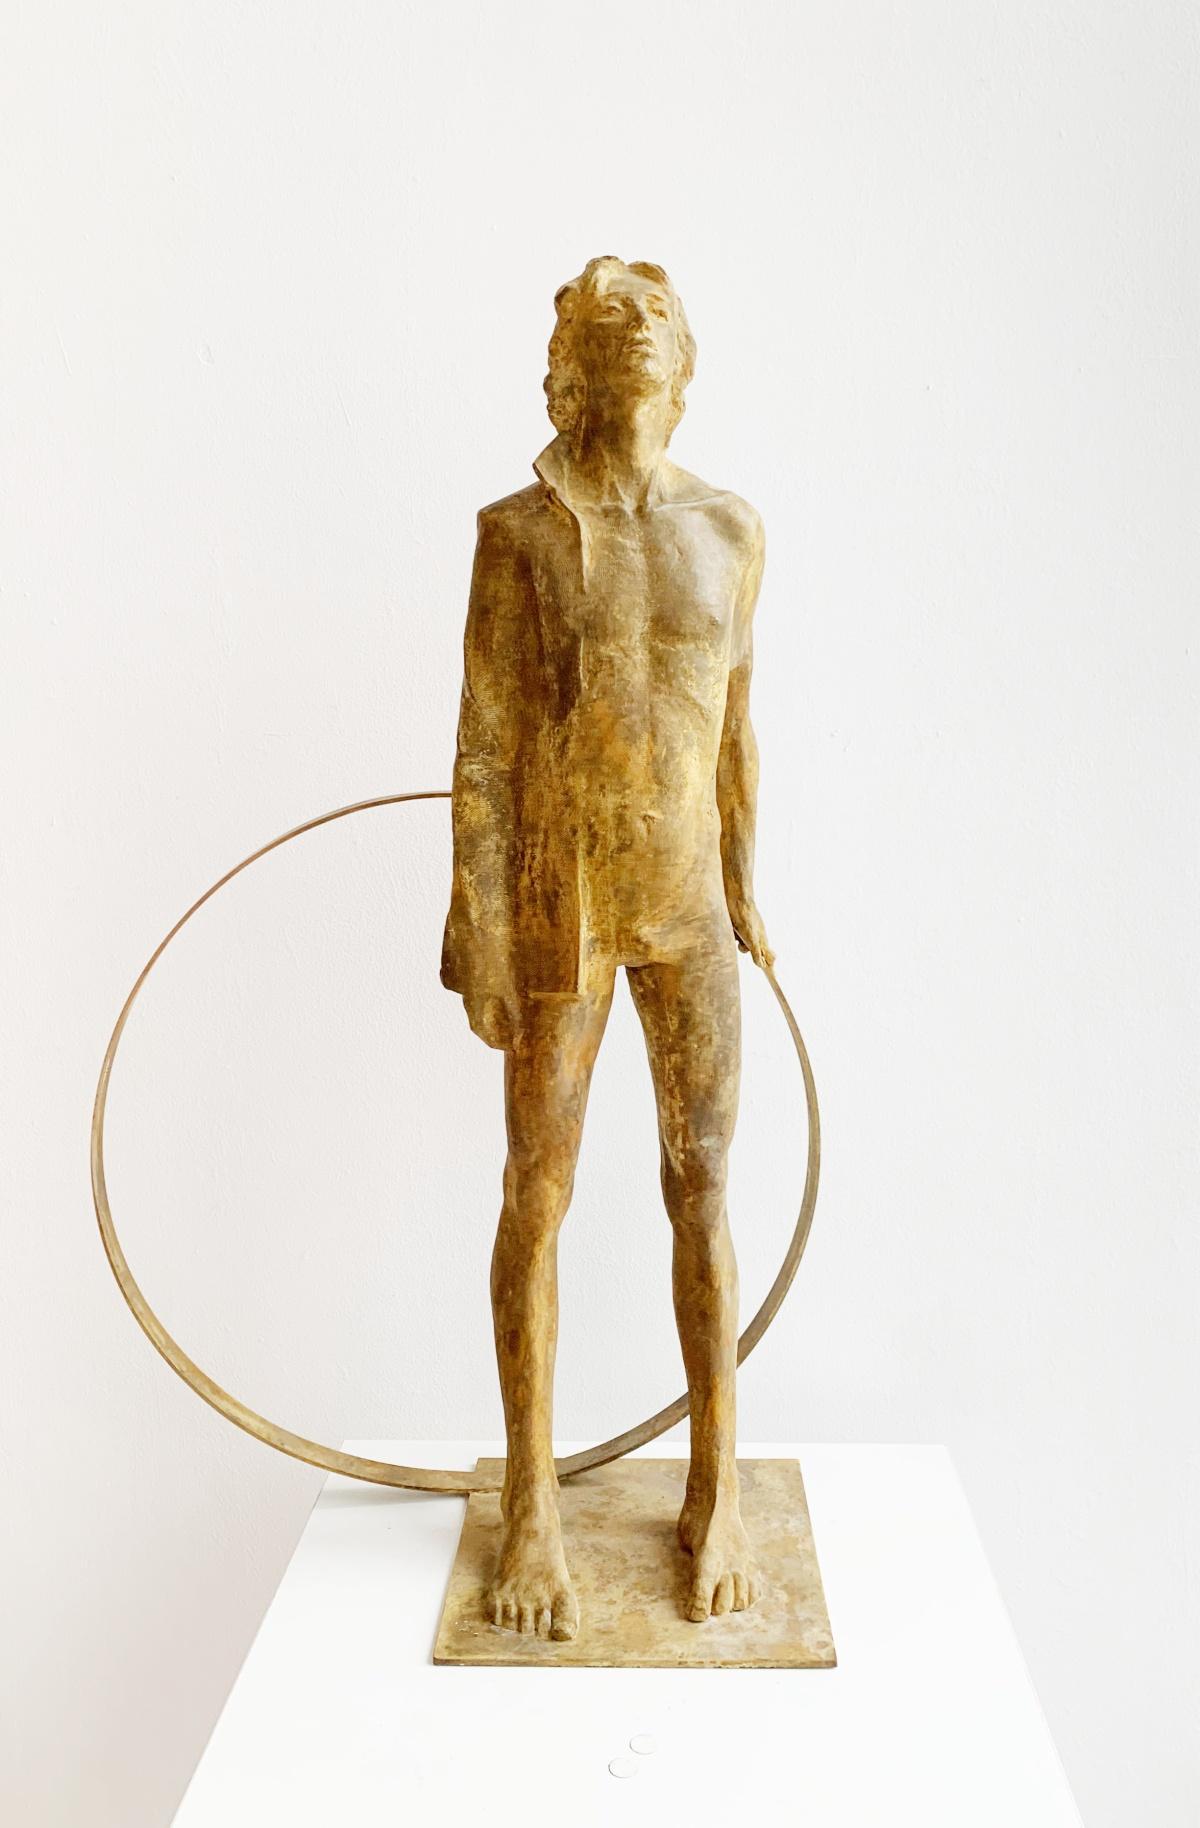 Boy with a hoop. Figurative bronze sculpture, Polish art, Limited edition